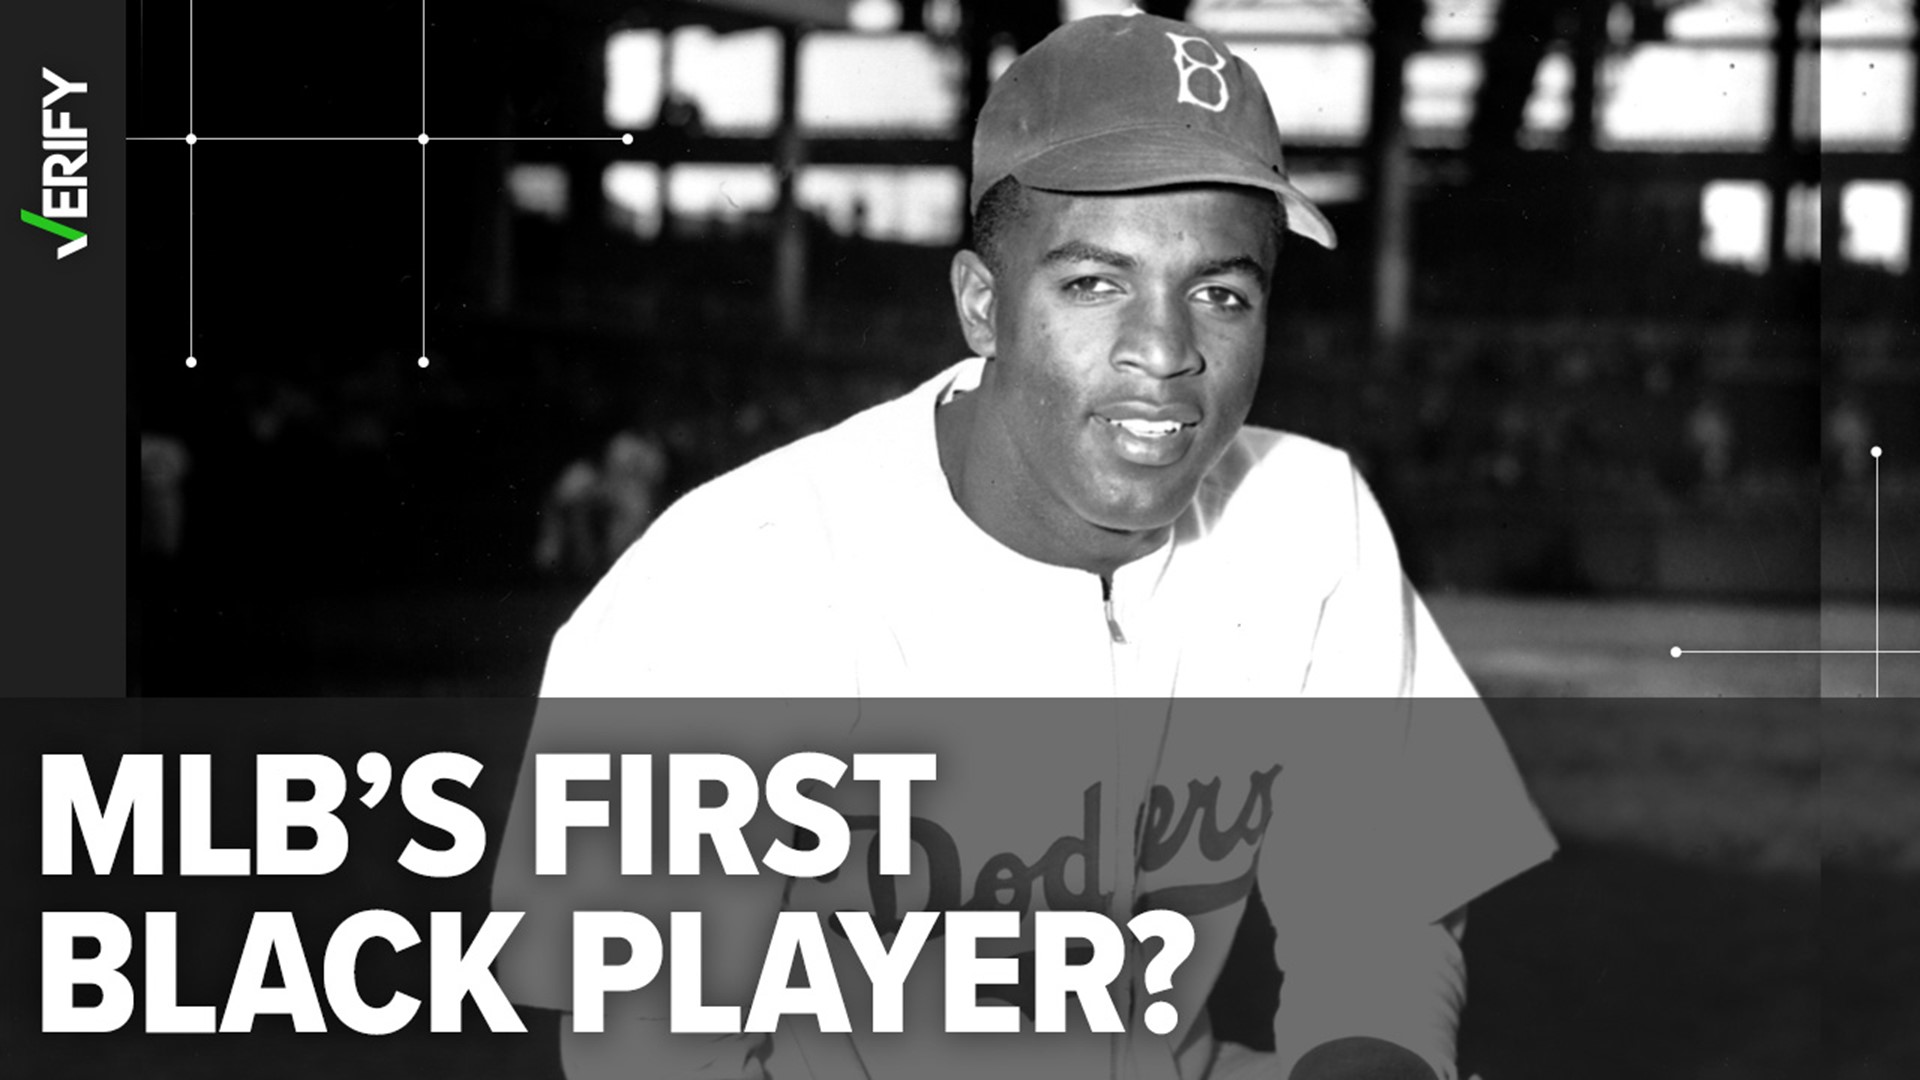 Jackie Robinson's original pro baseball contracts to be auctioned, Baseball